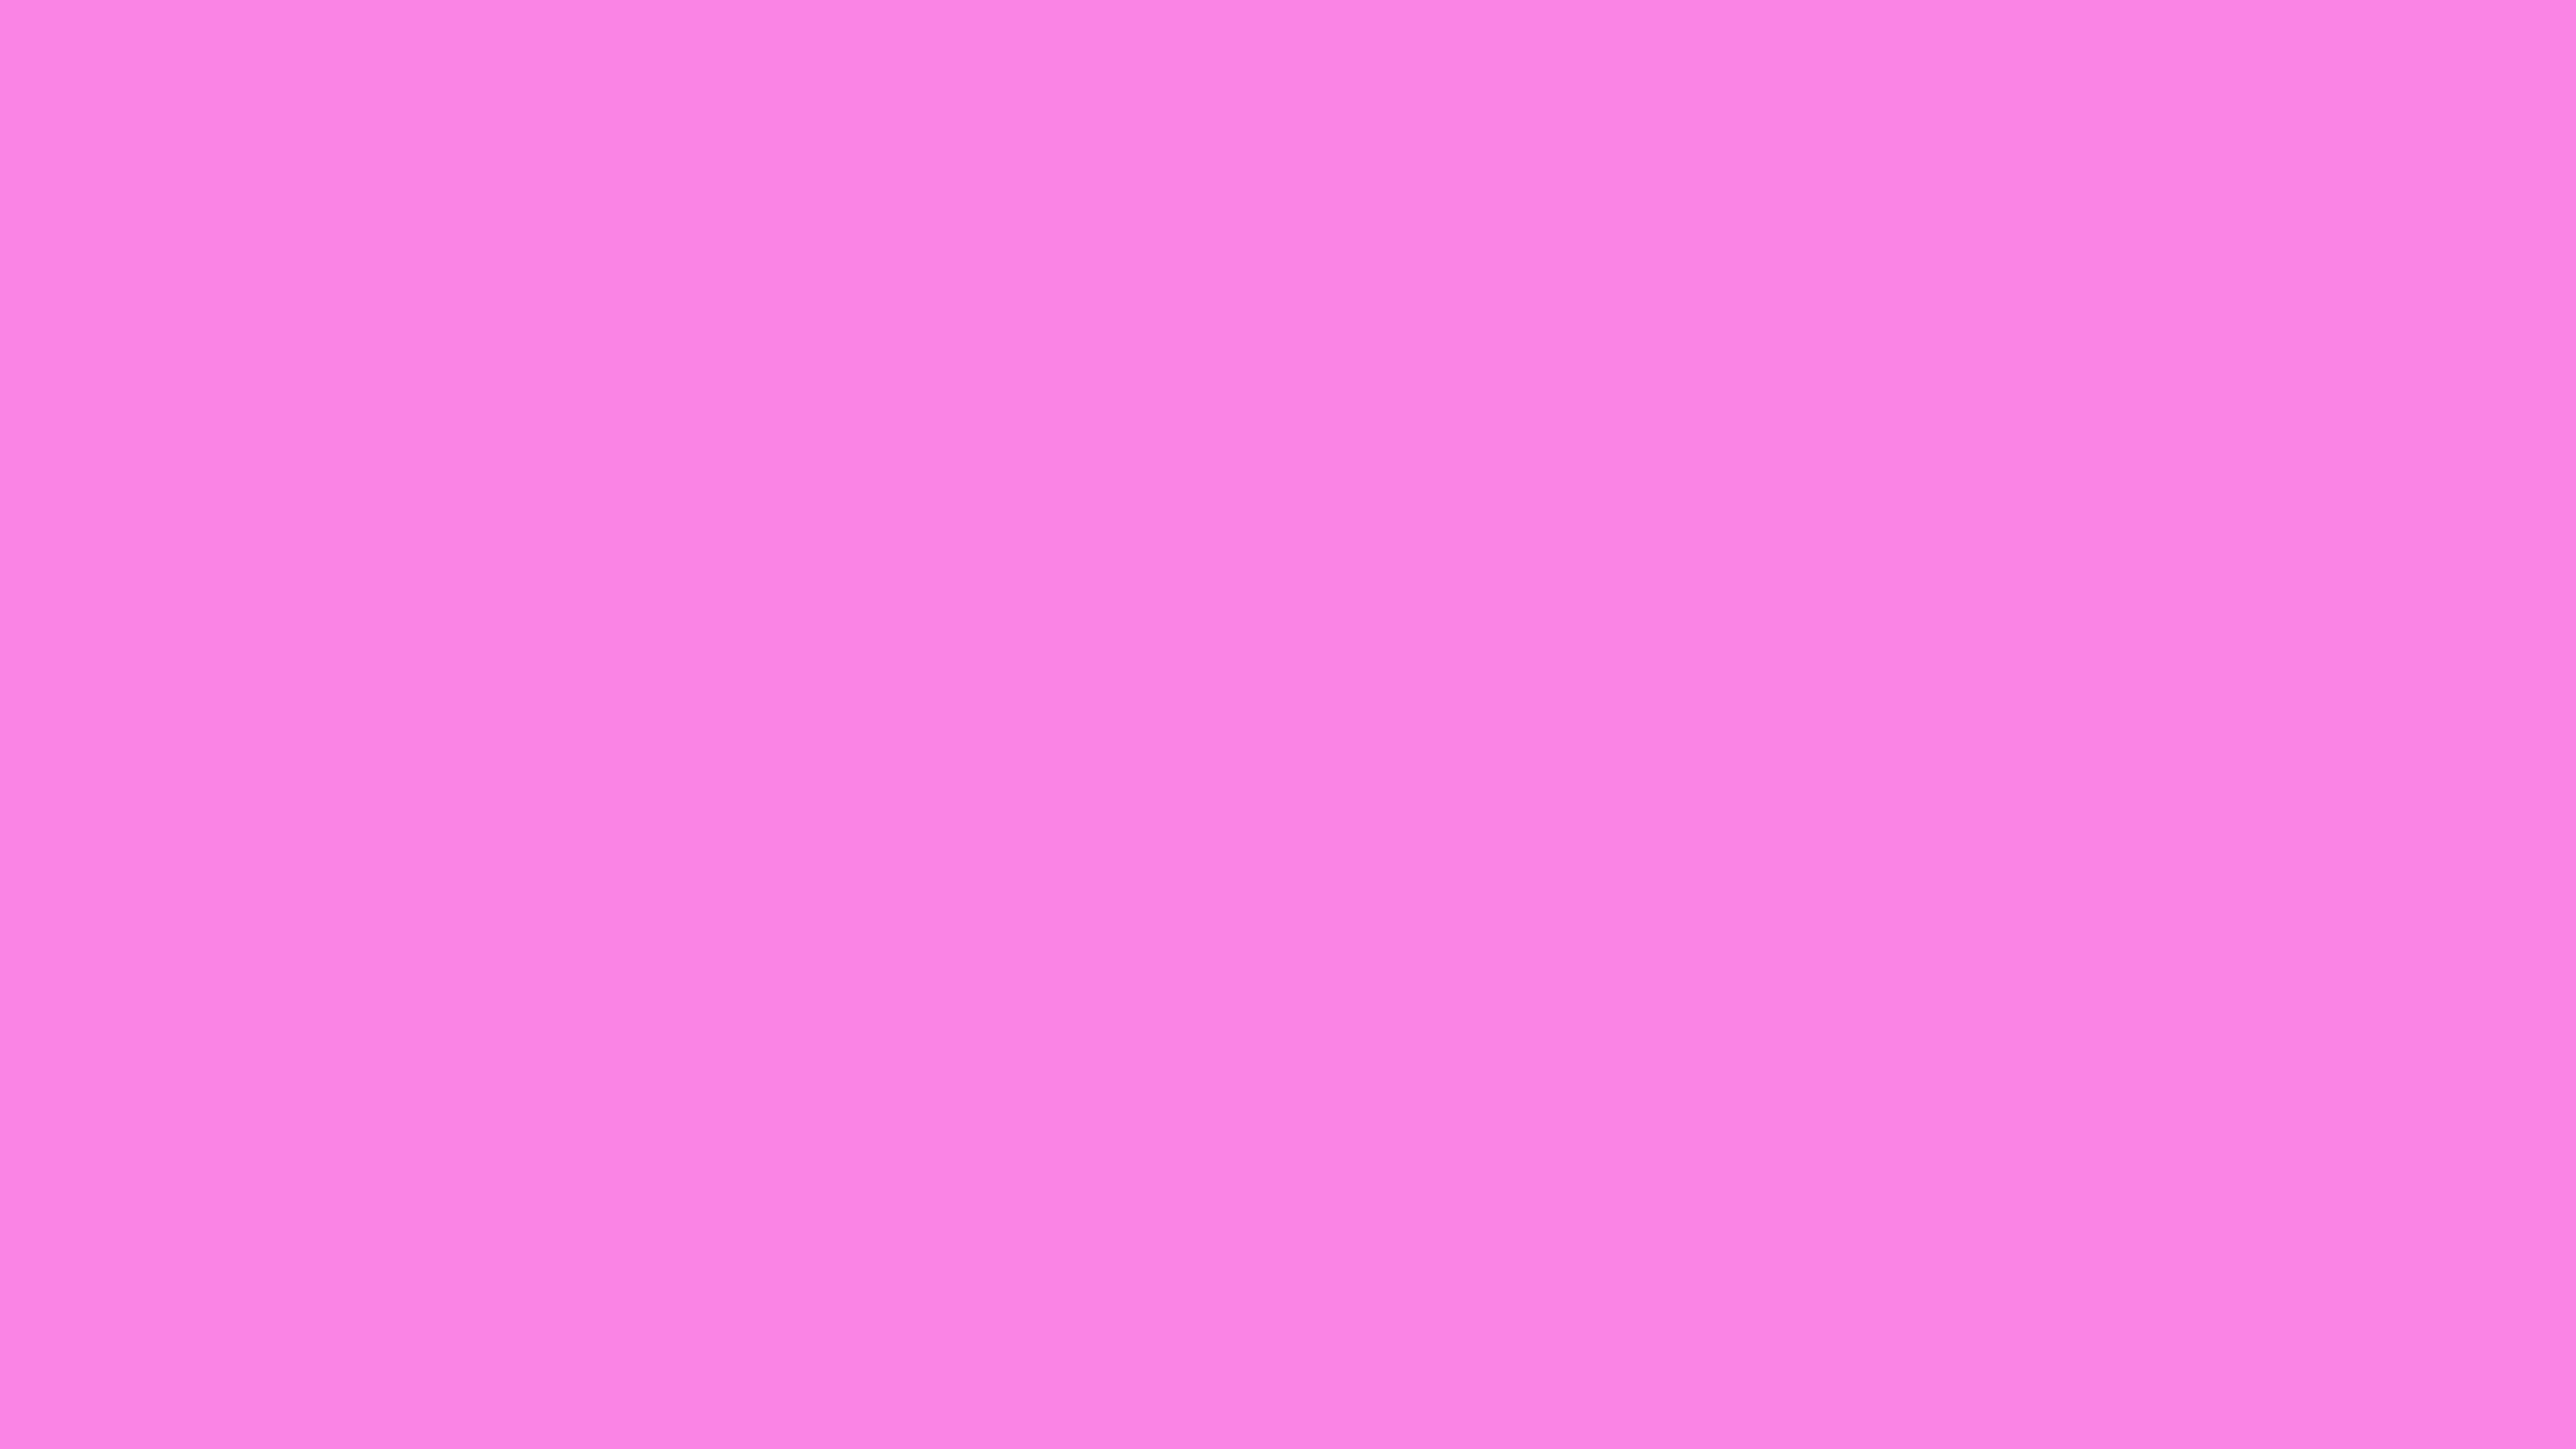 3840x2160 Pale Magenta Solid Color Background